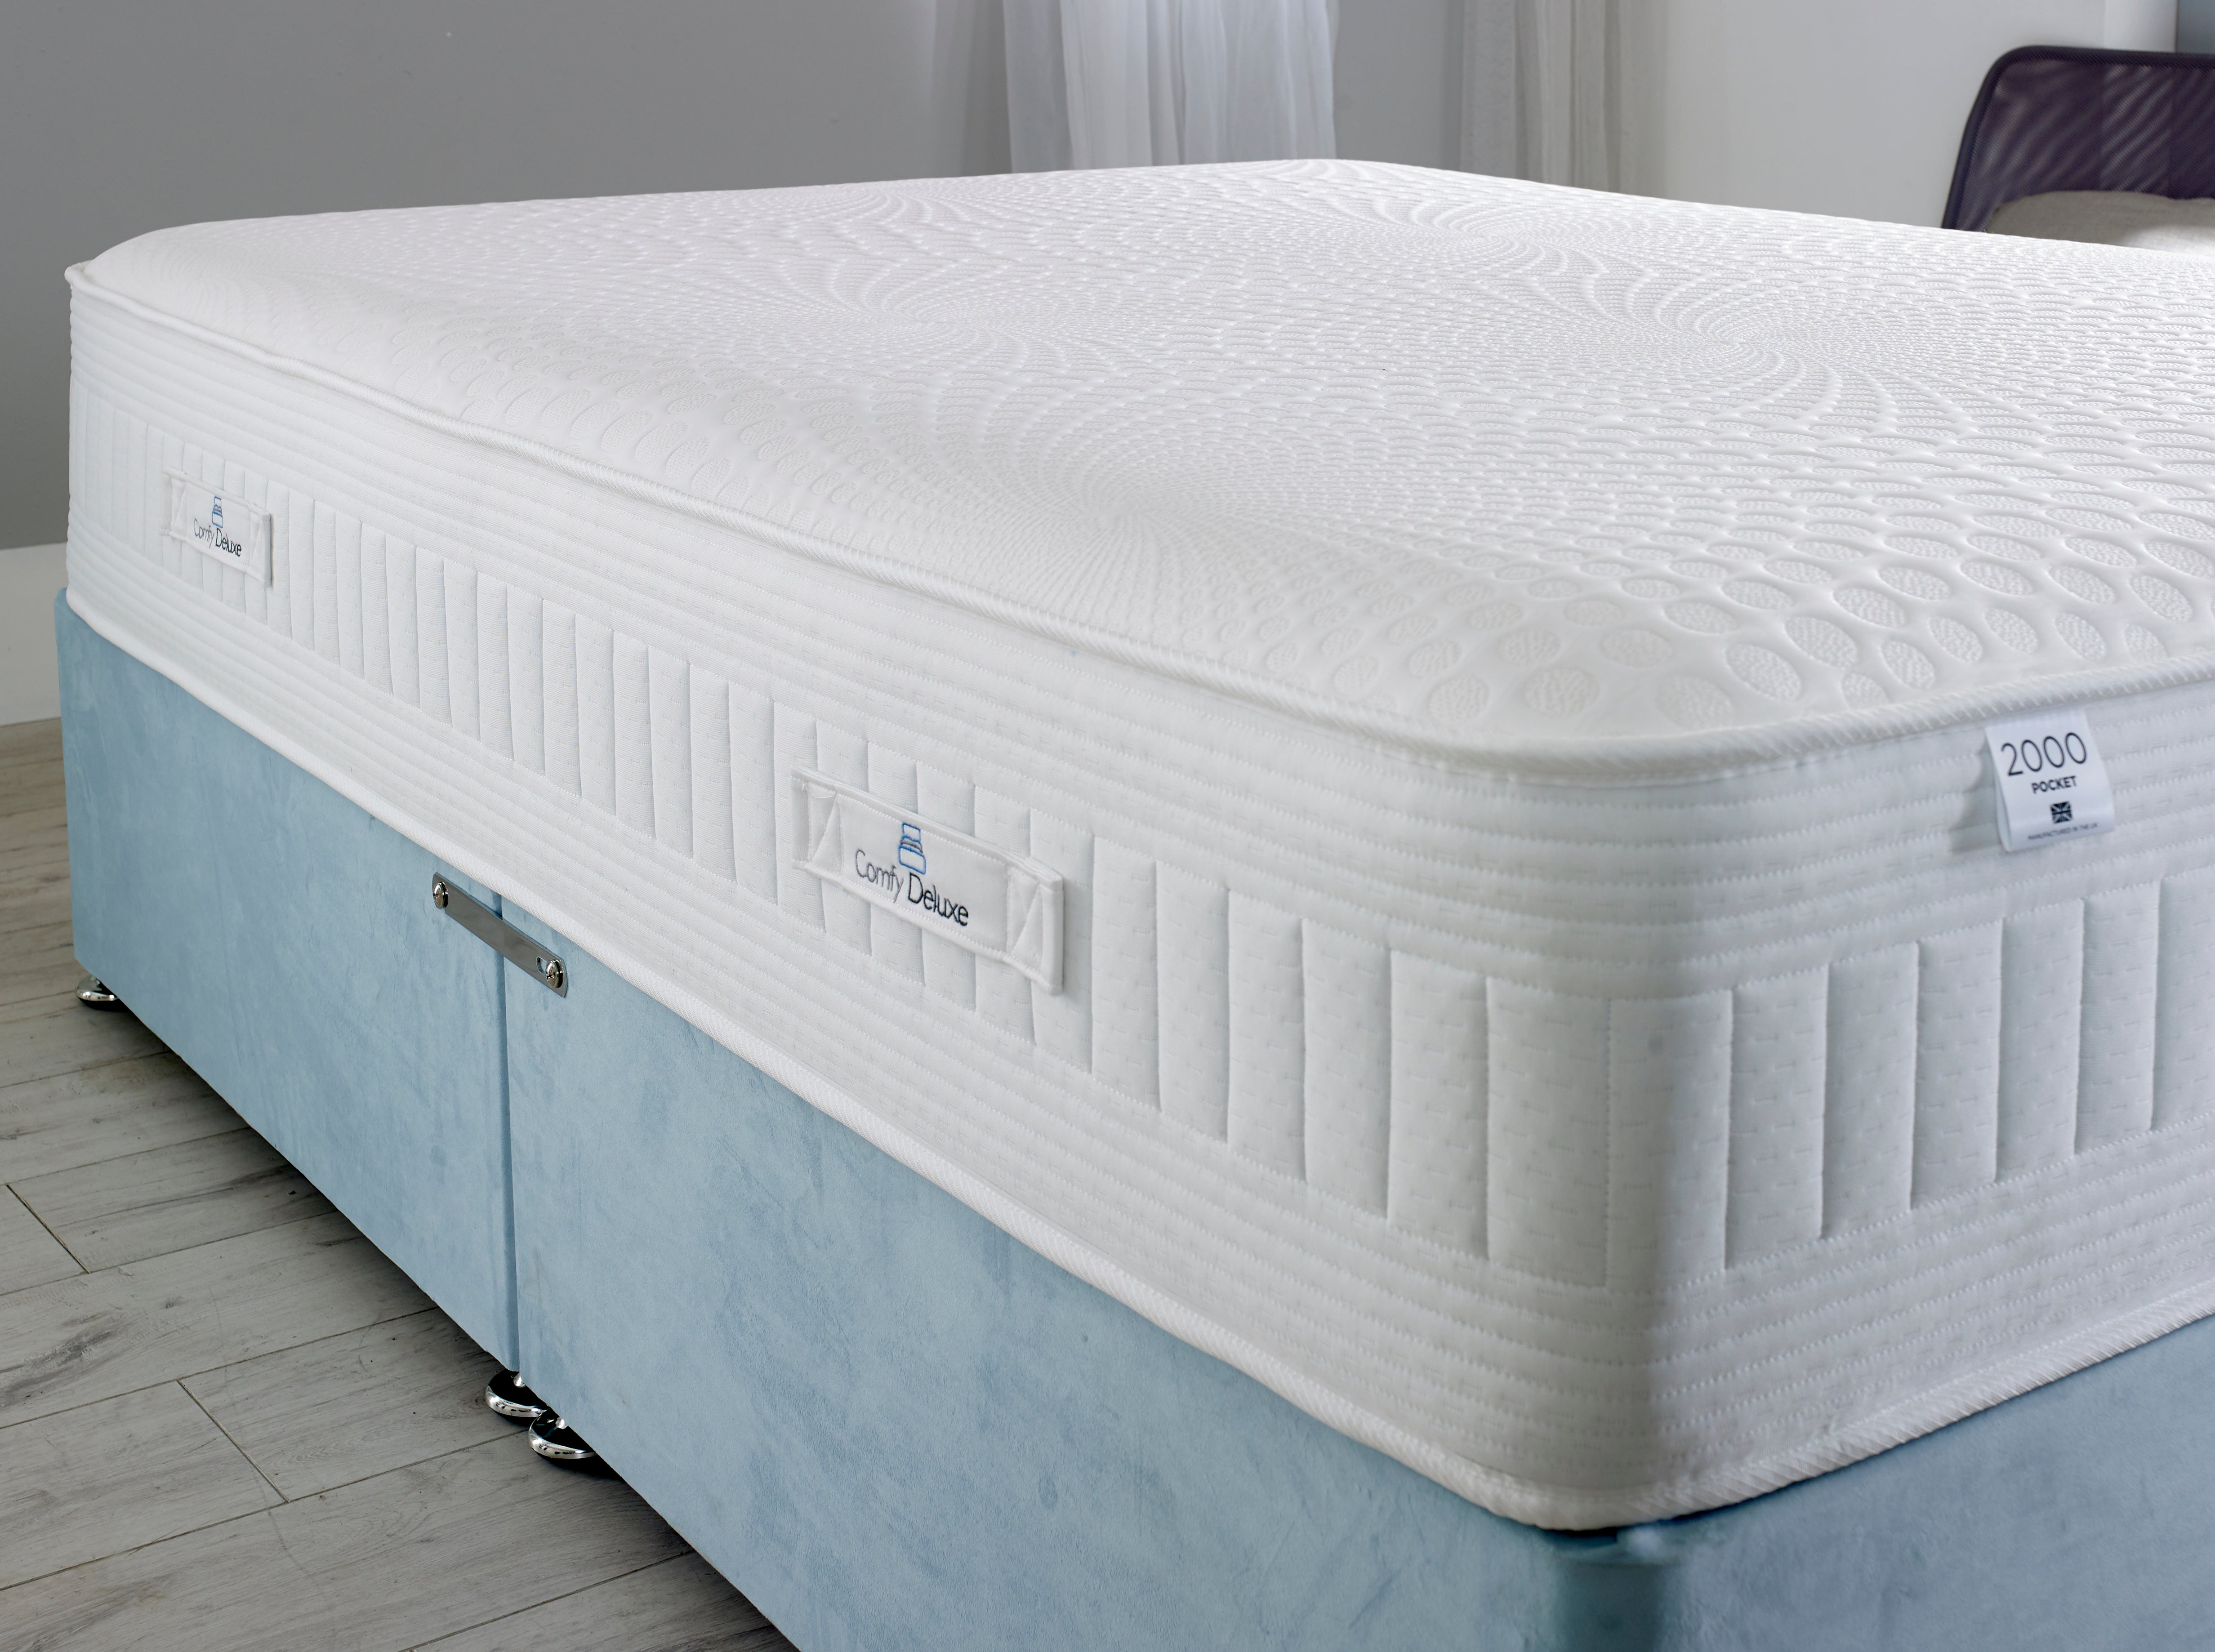 Lilly Encapsulated Orthopaedic Mattress